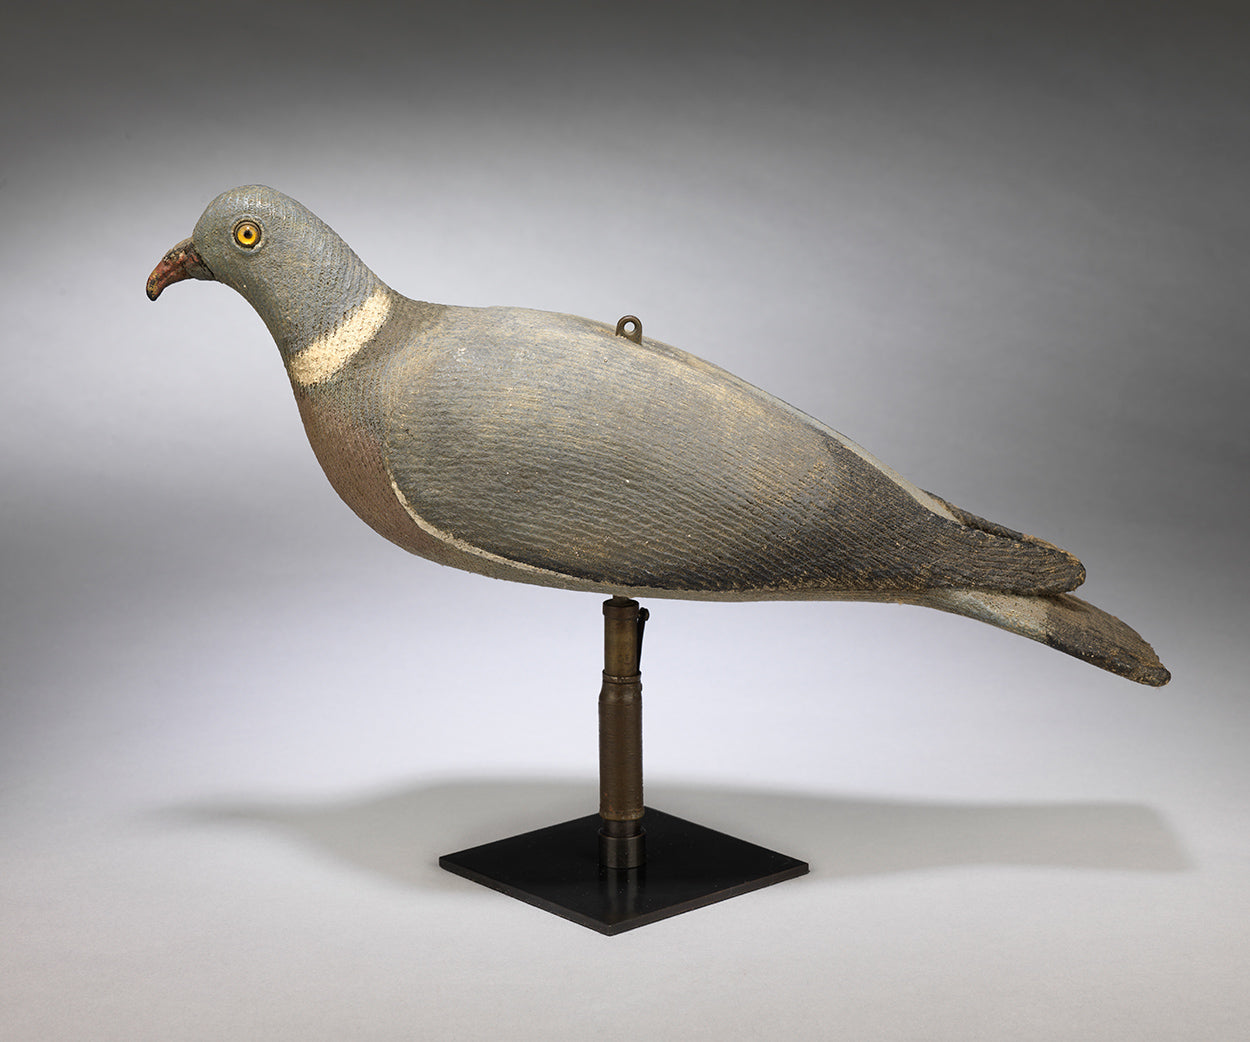 A Rare Documentary Articulated Working Wood Pigeon Decoy